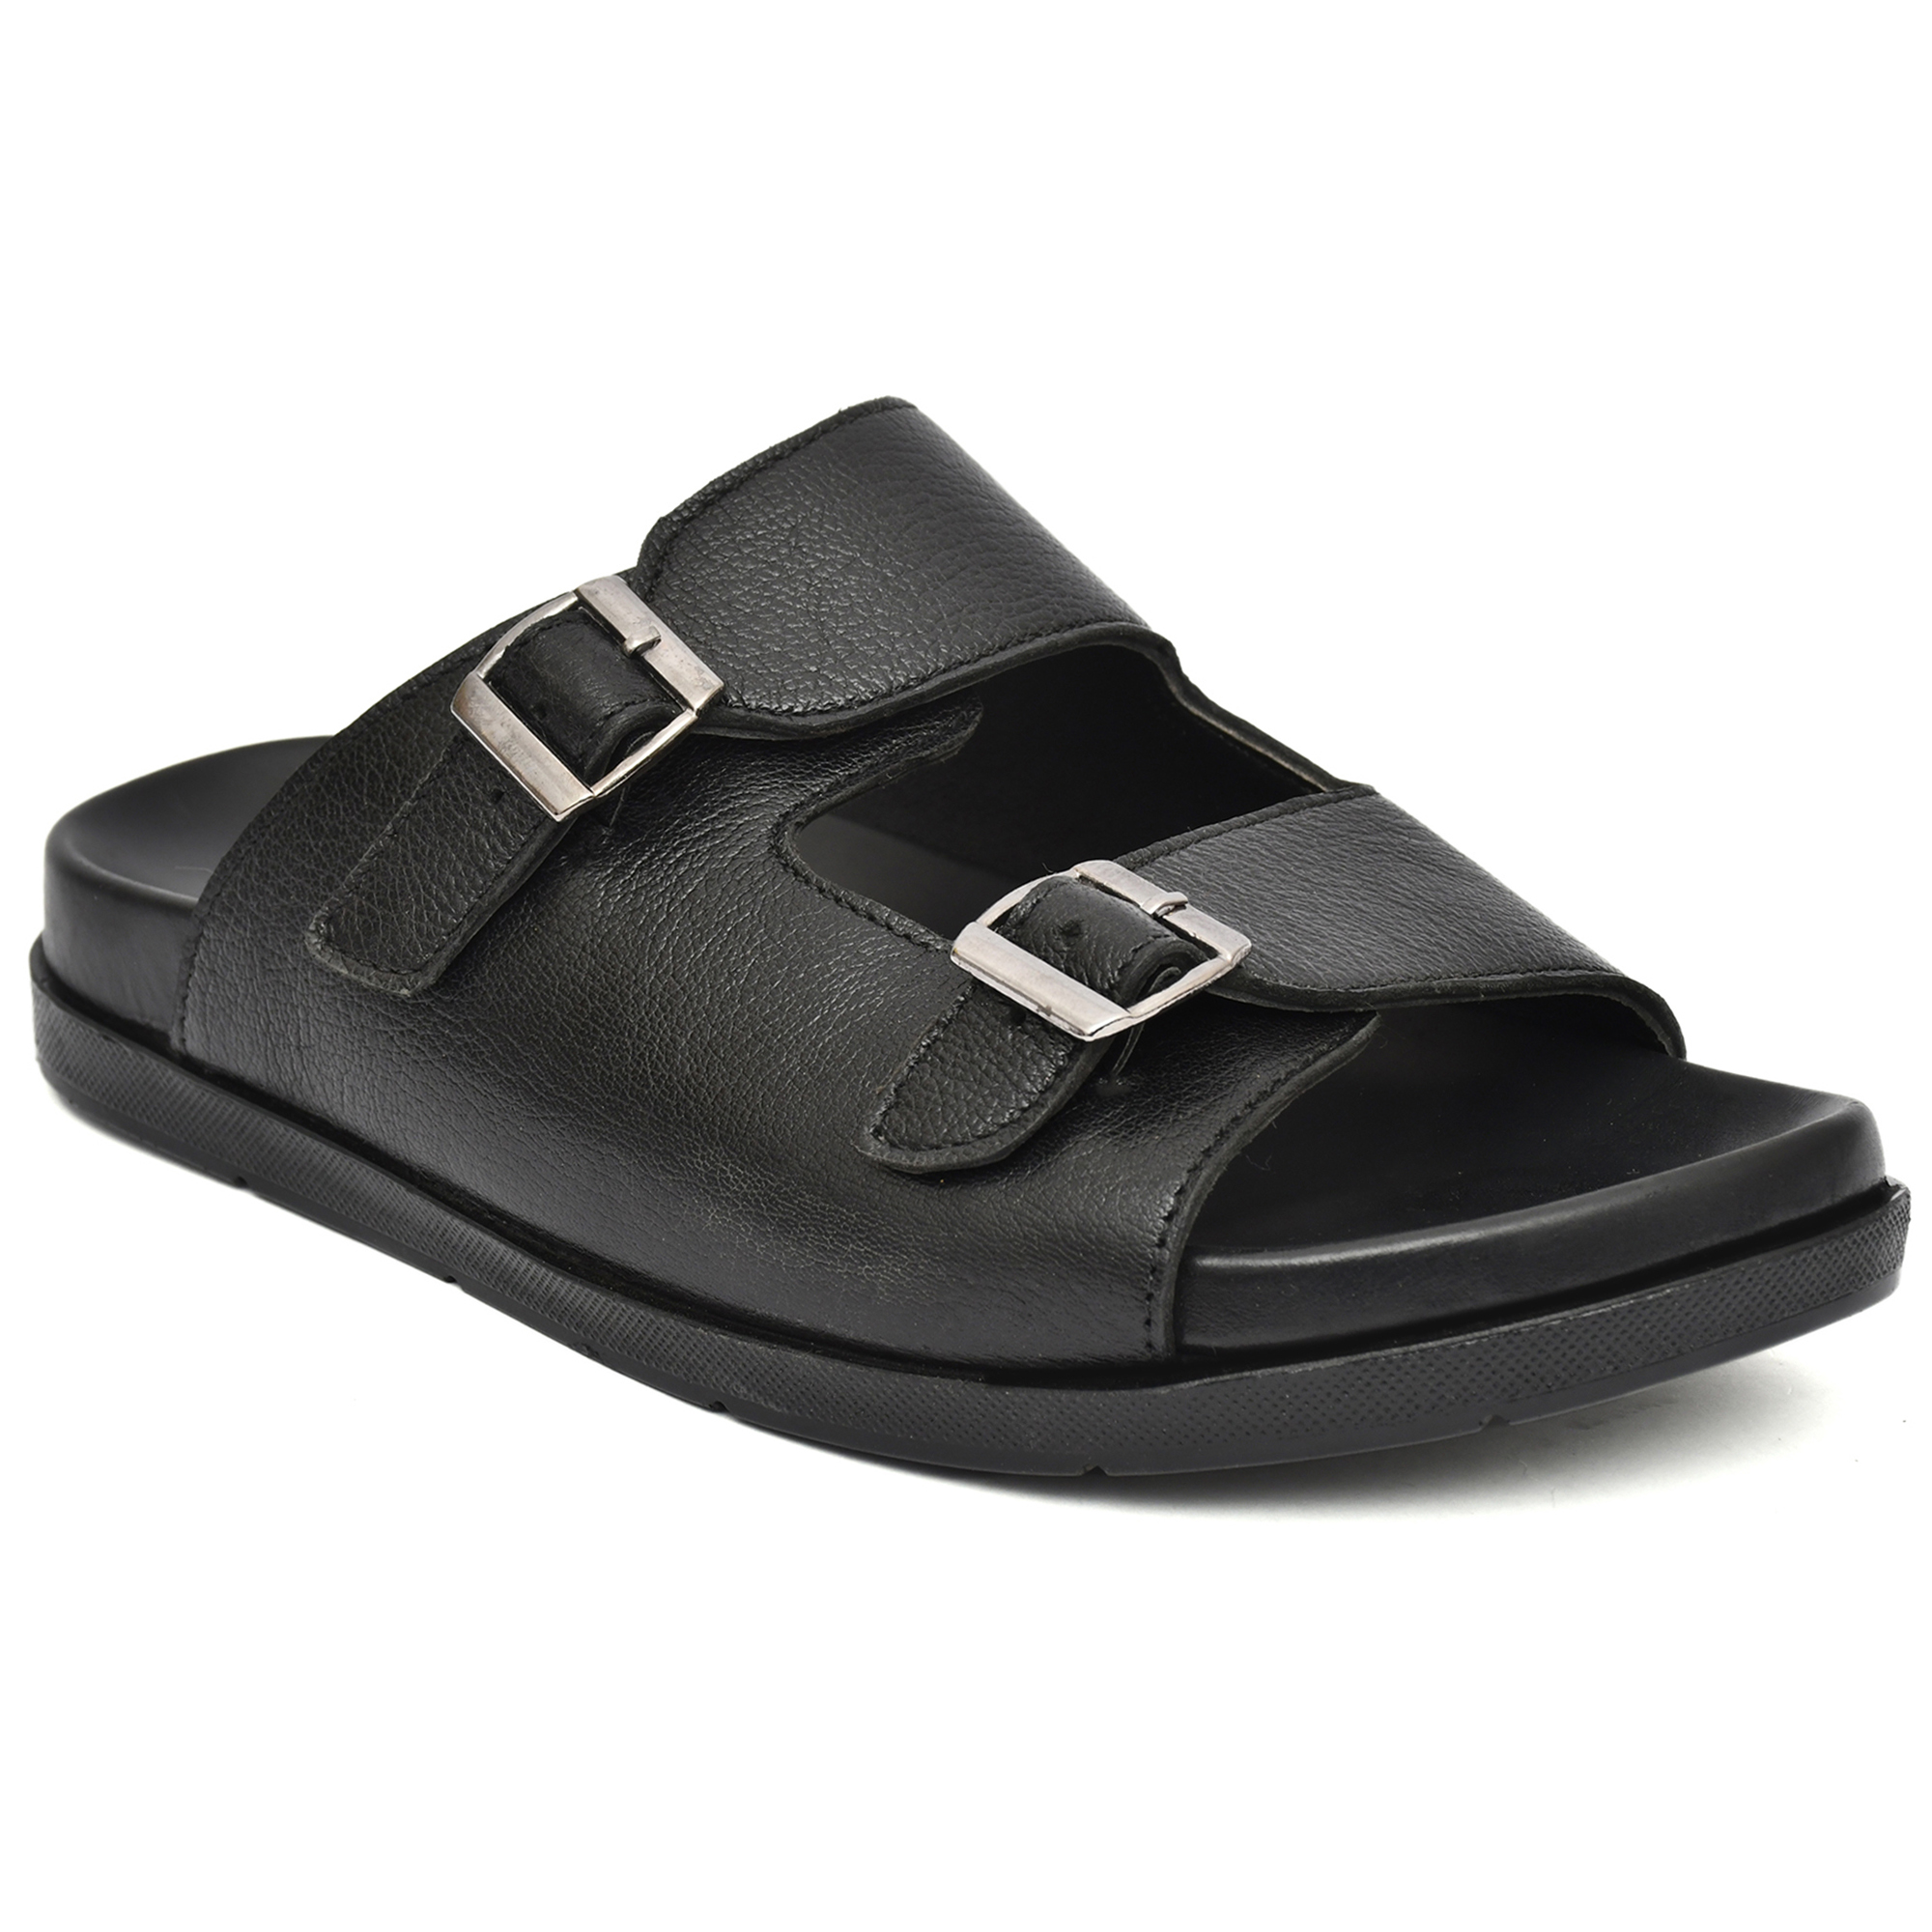 Black Leather Slippers for Mens with Memory foam footpad & TPR Sole by asm.